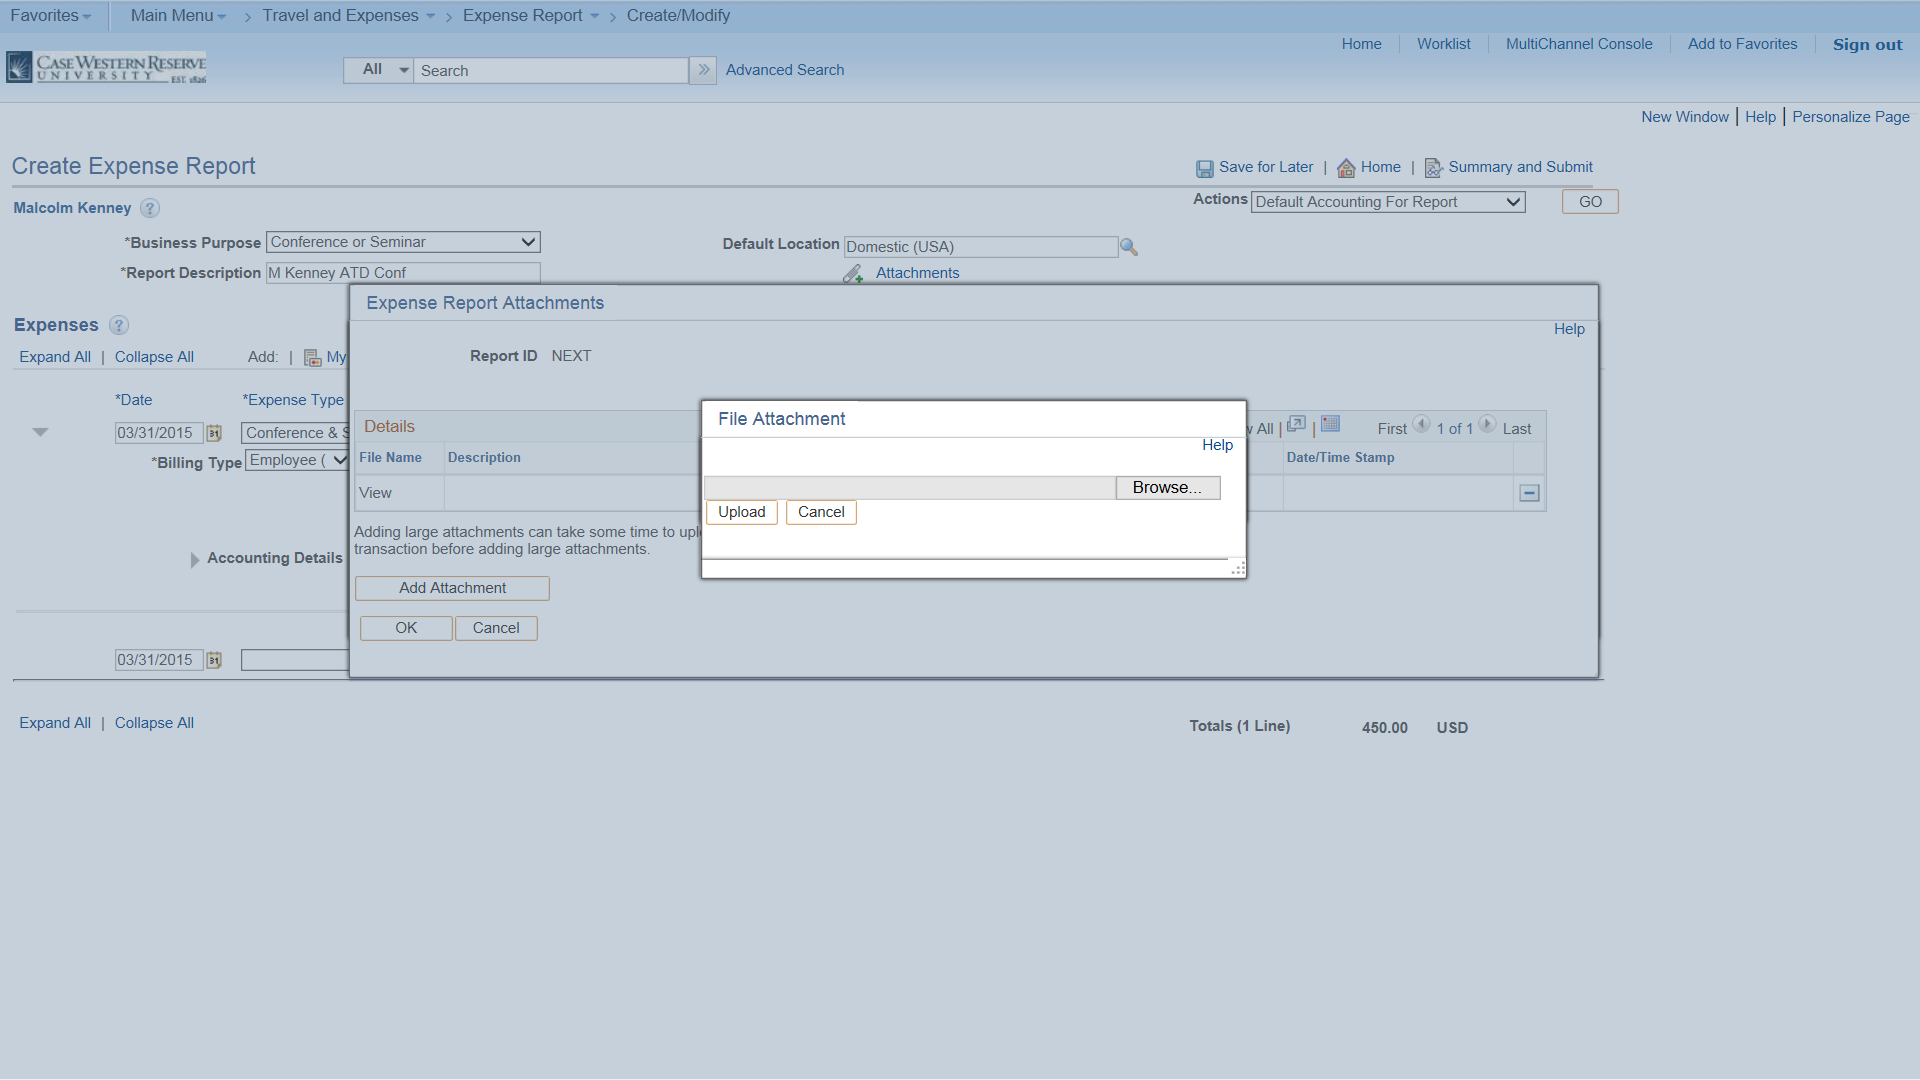 PeopleSoft Financials screen shot displaying the Add Attachment box to upload a file